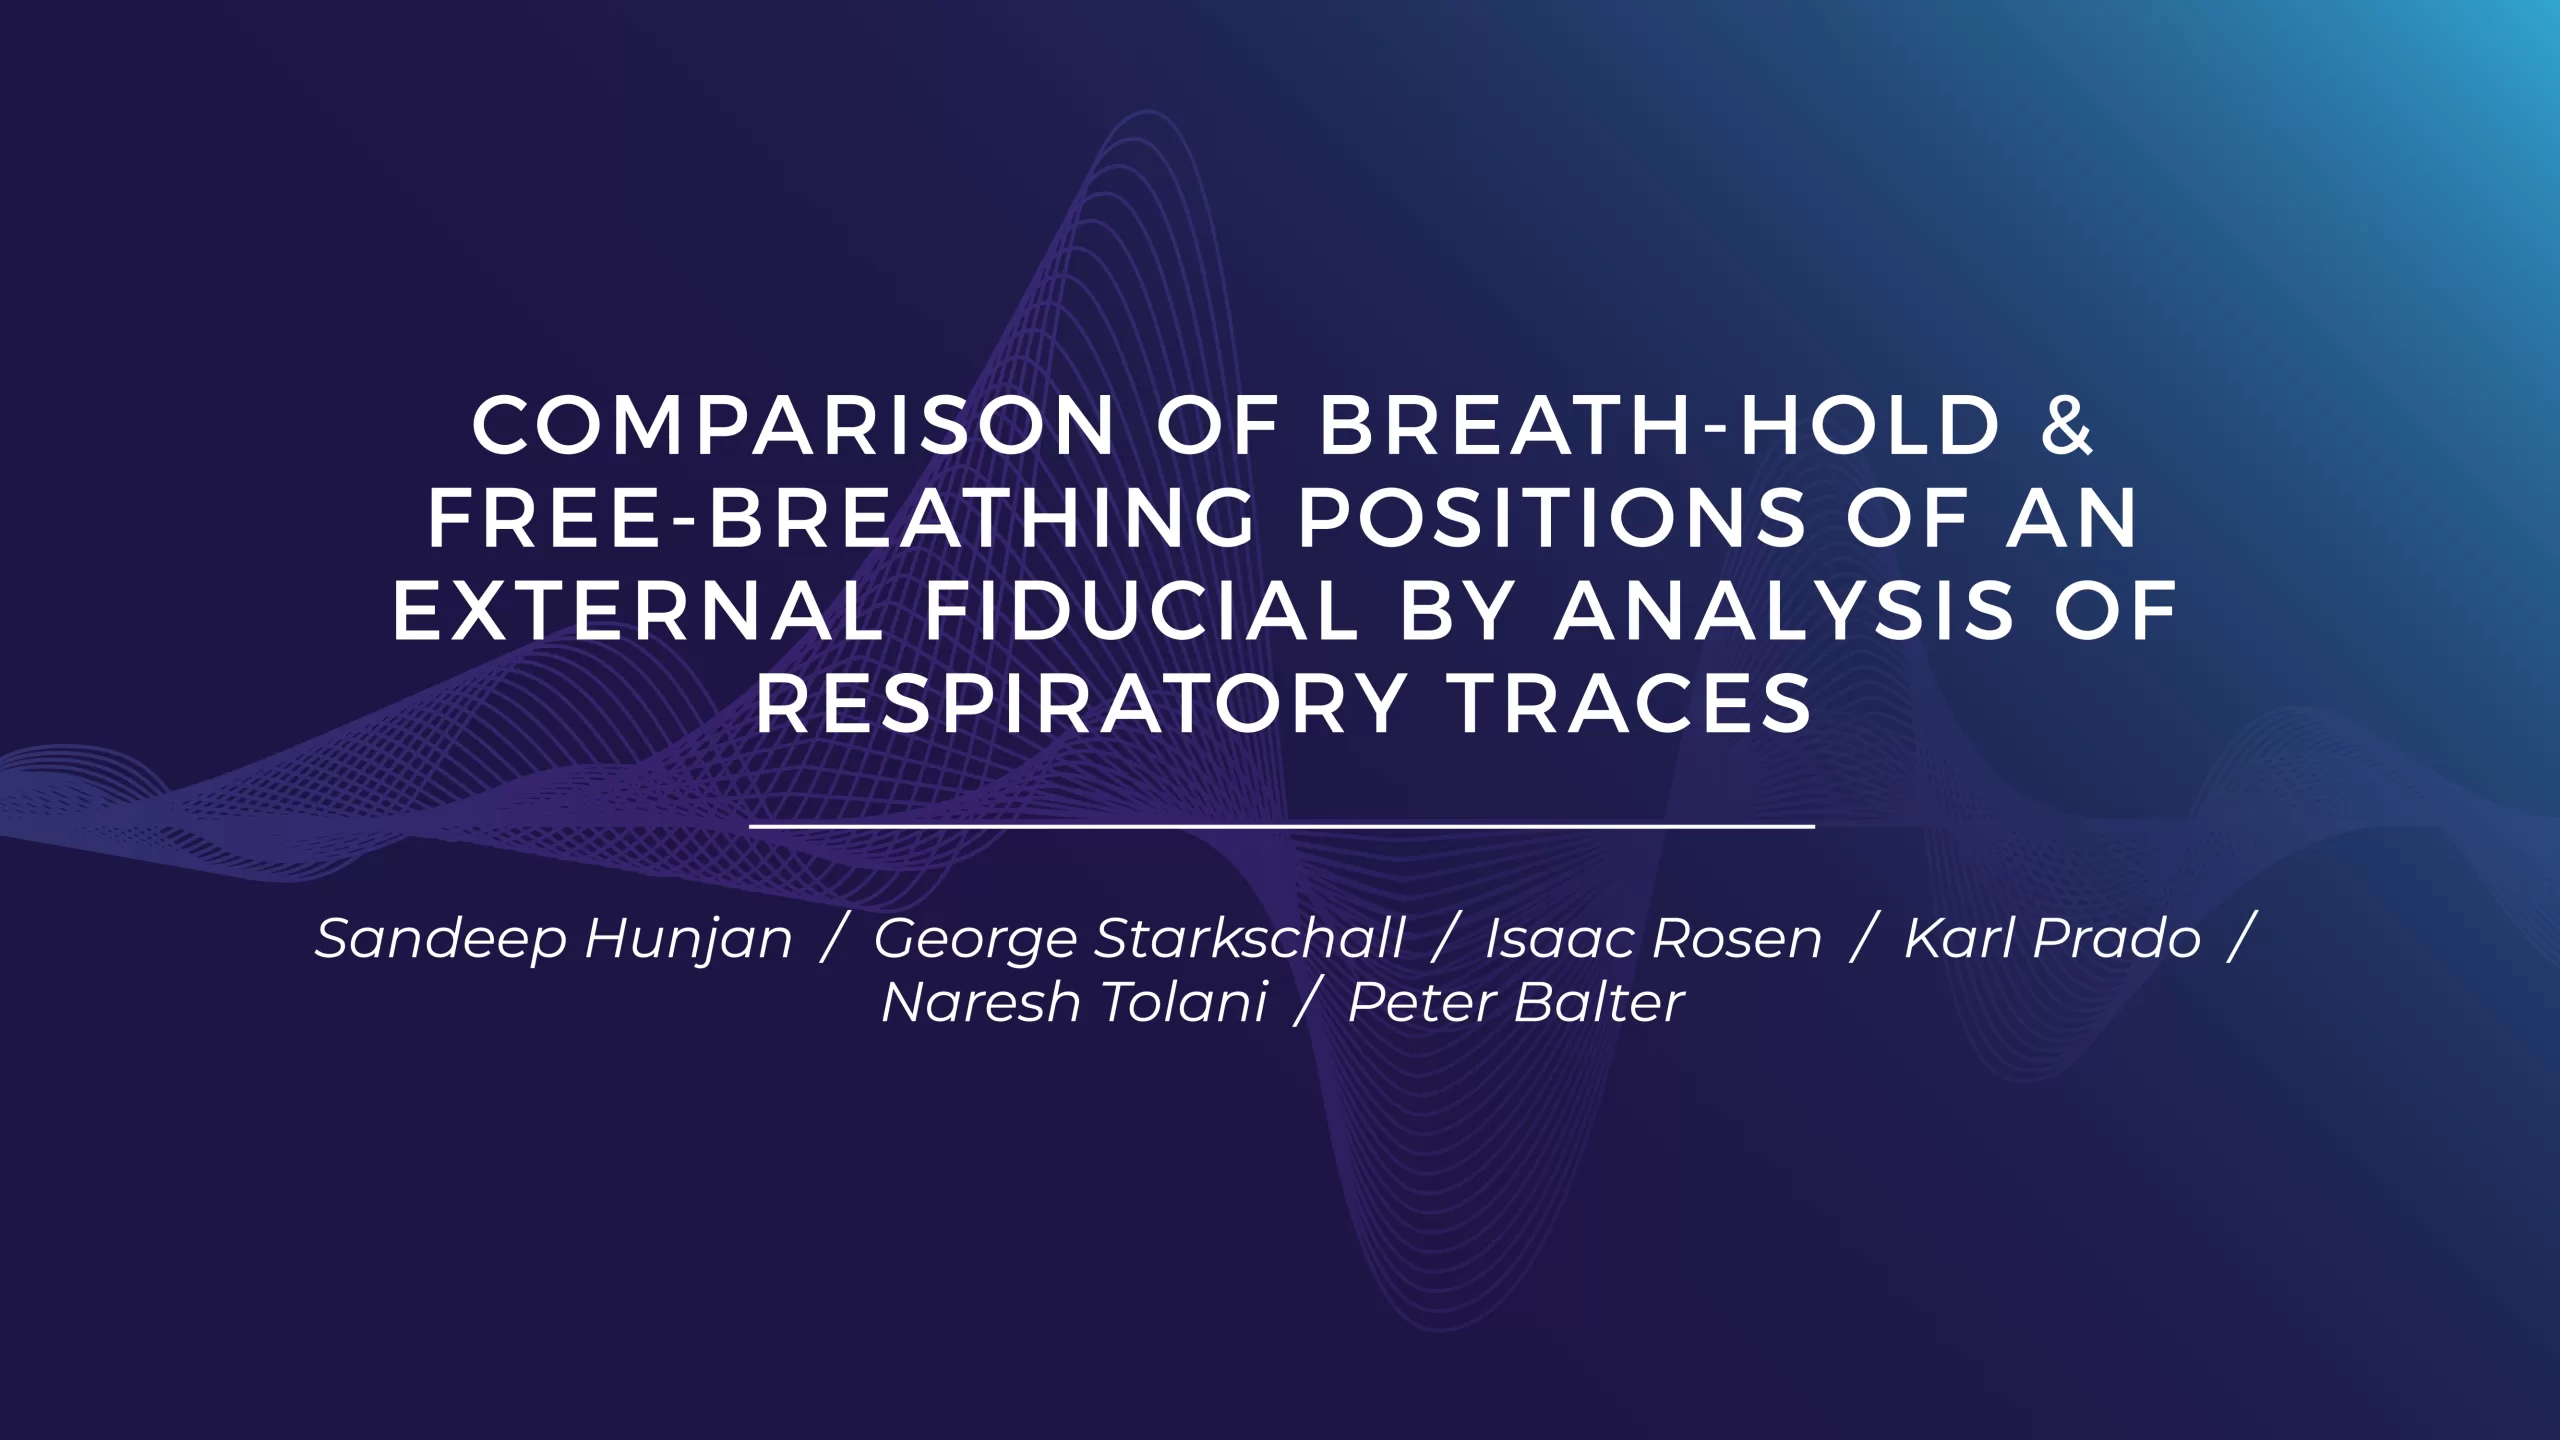 "Comparison of Breath-Hold & Free-Breathing Positions of an External Fiducial by Analysis of Respiratory Traces"